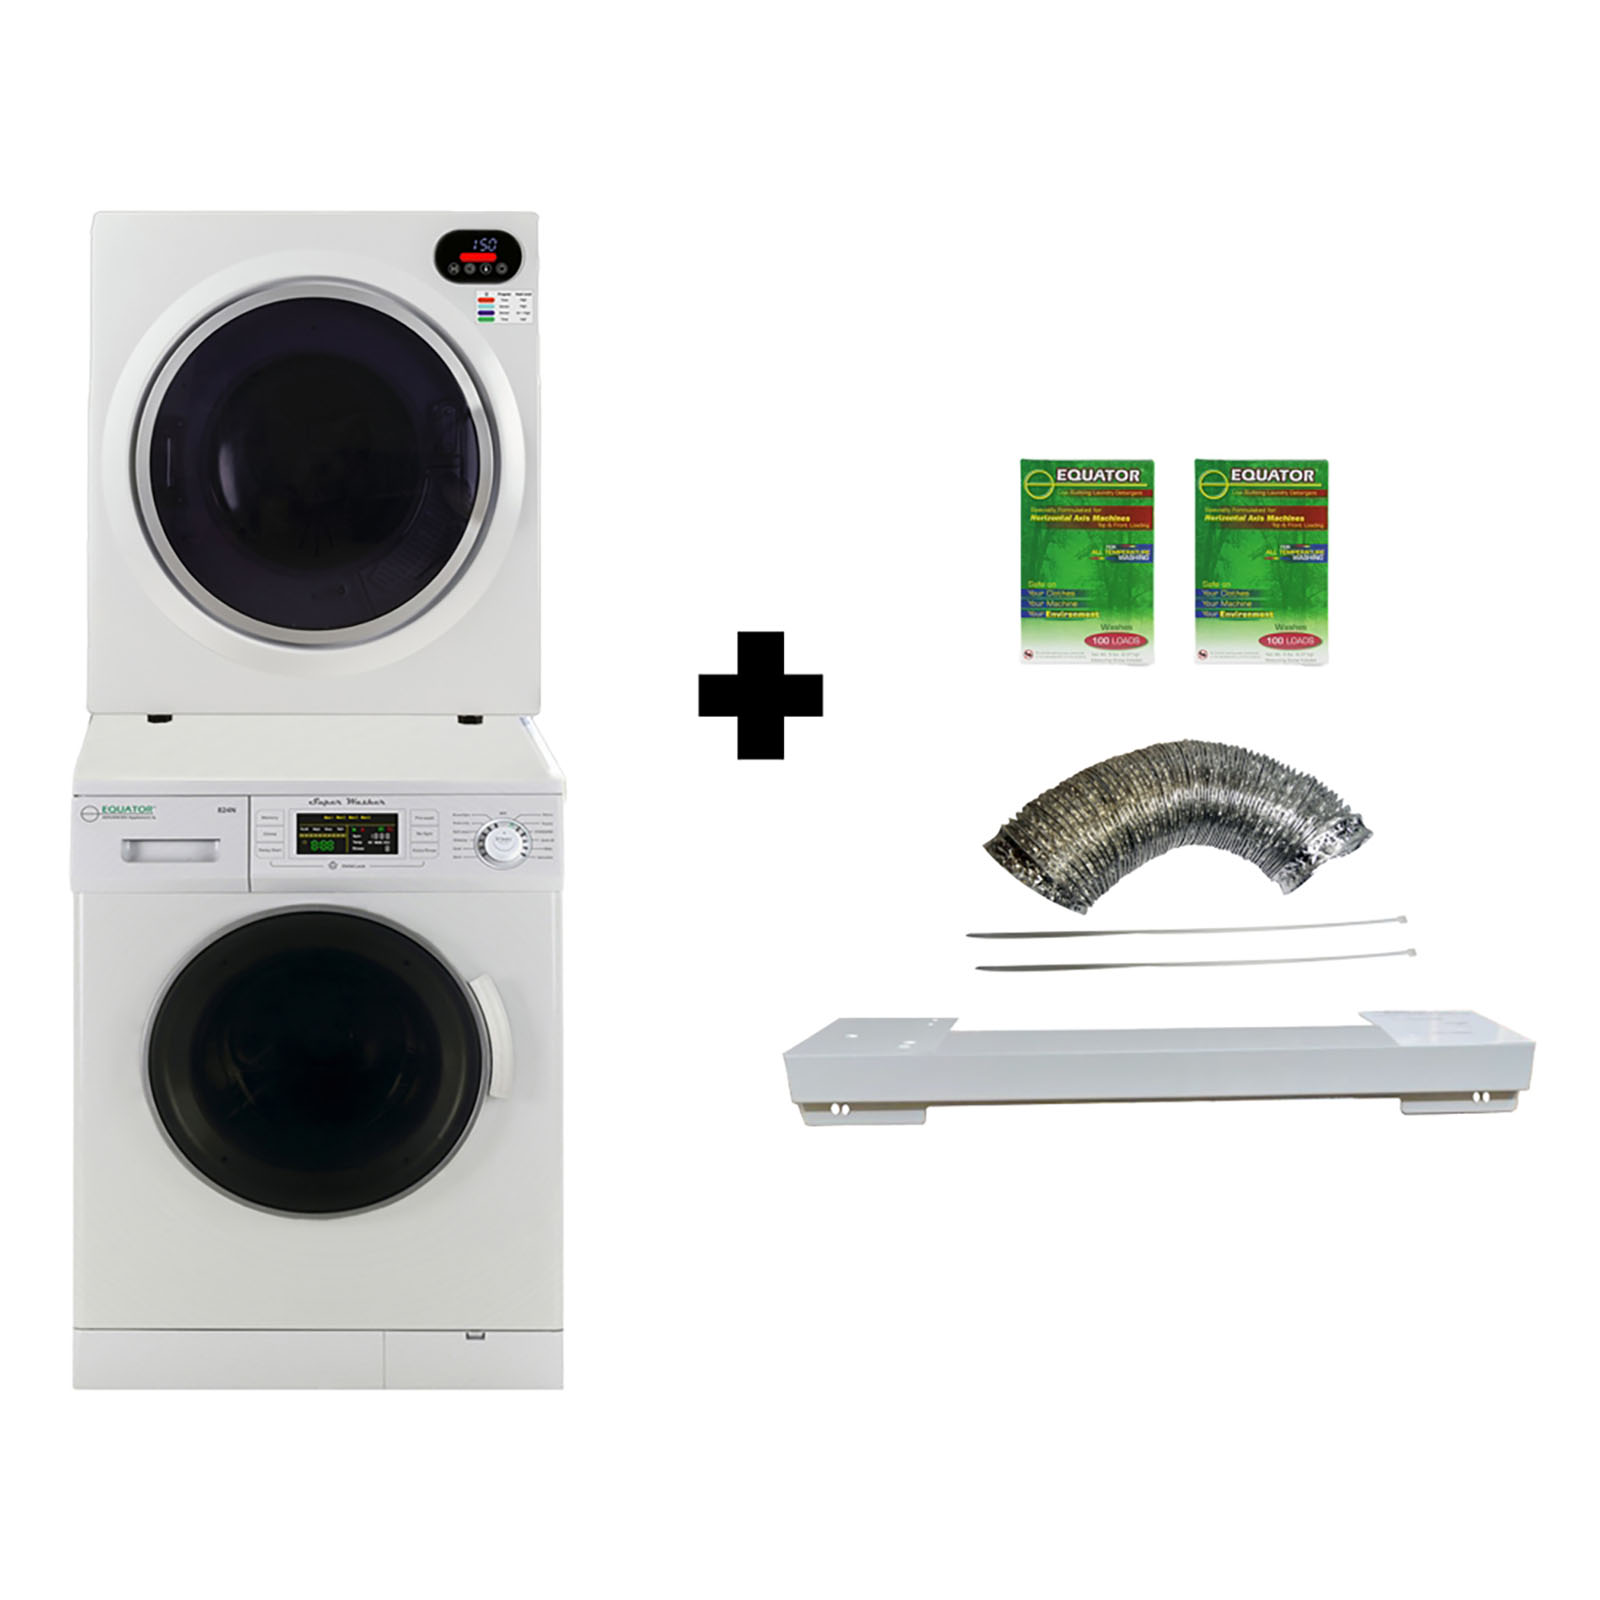 Equator Advanced Appliances 824N848RSK3070IVK10552BoxesHE 824N and 848 and RSK3070 and IVK1055 Stackable Washer and Compact Shor